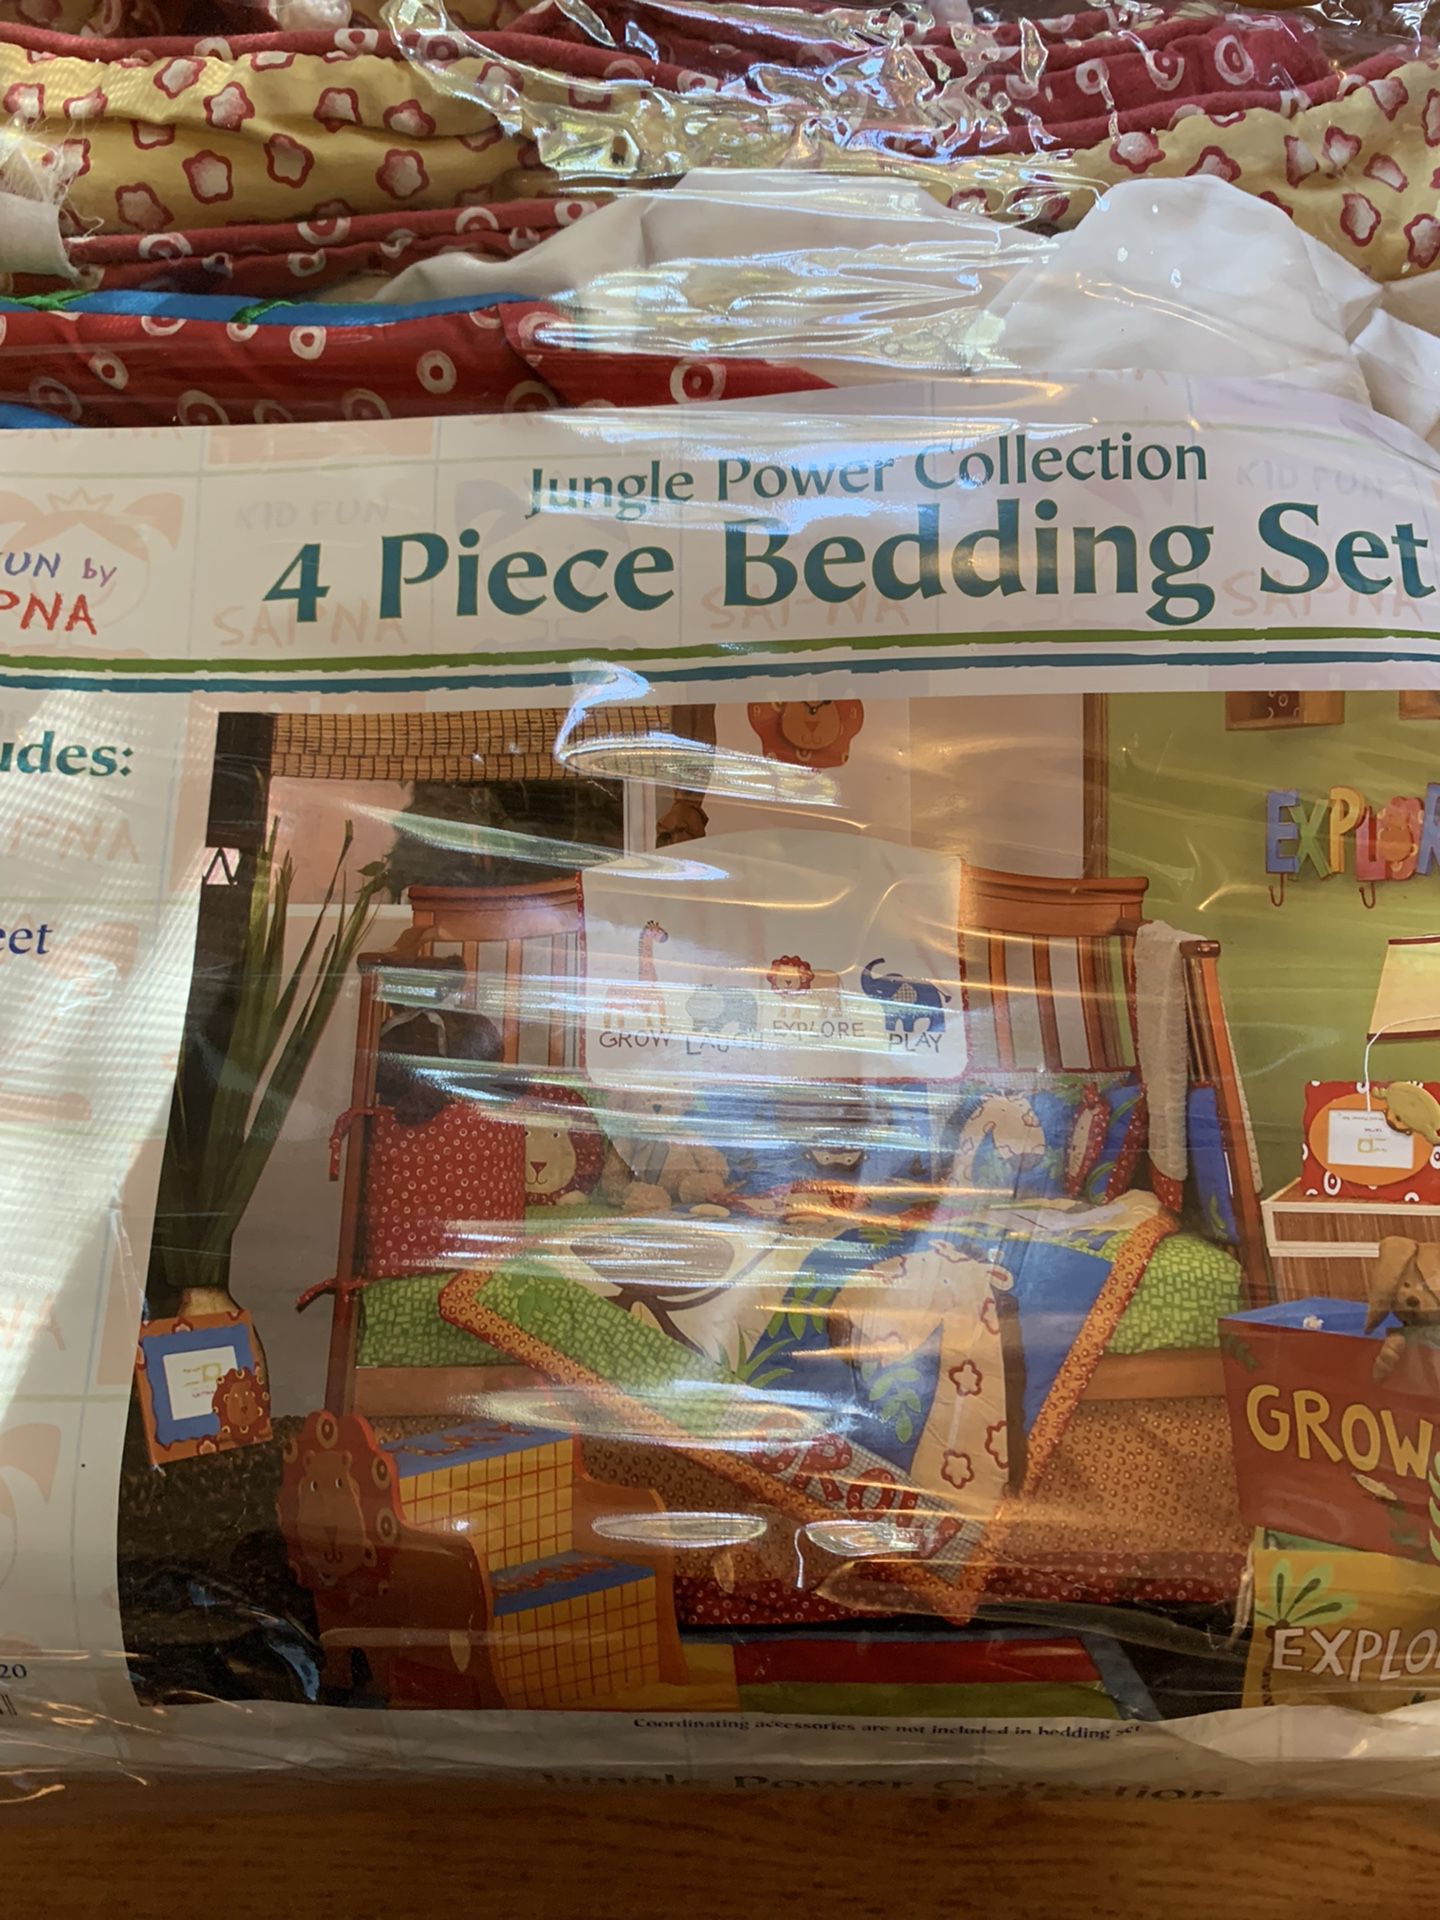 4 Bed Setting $15